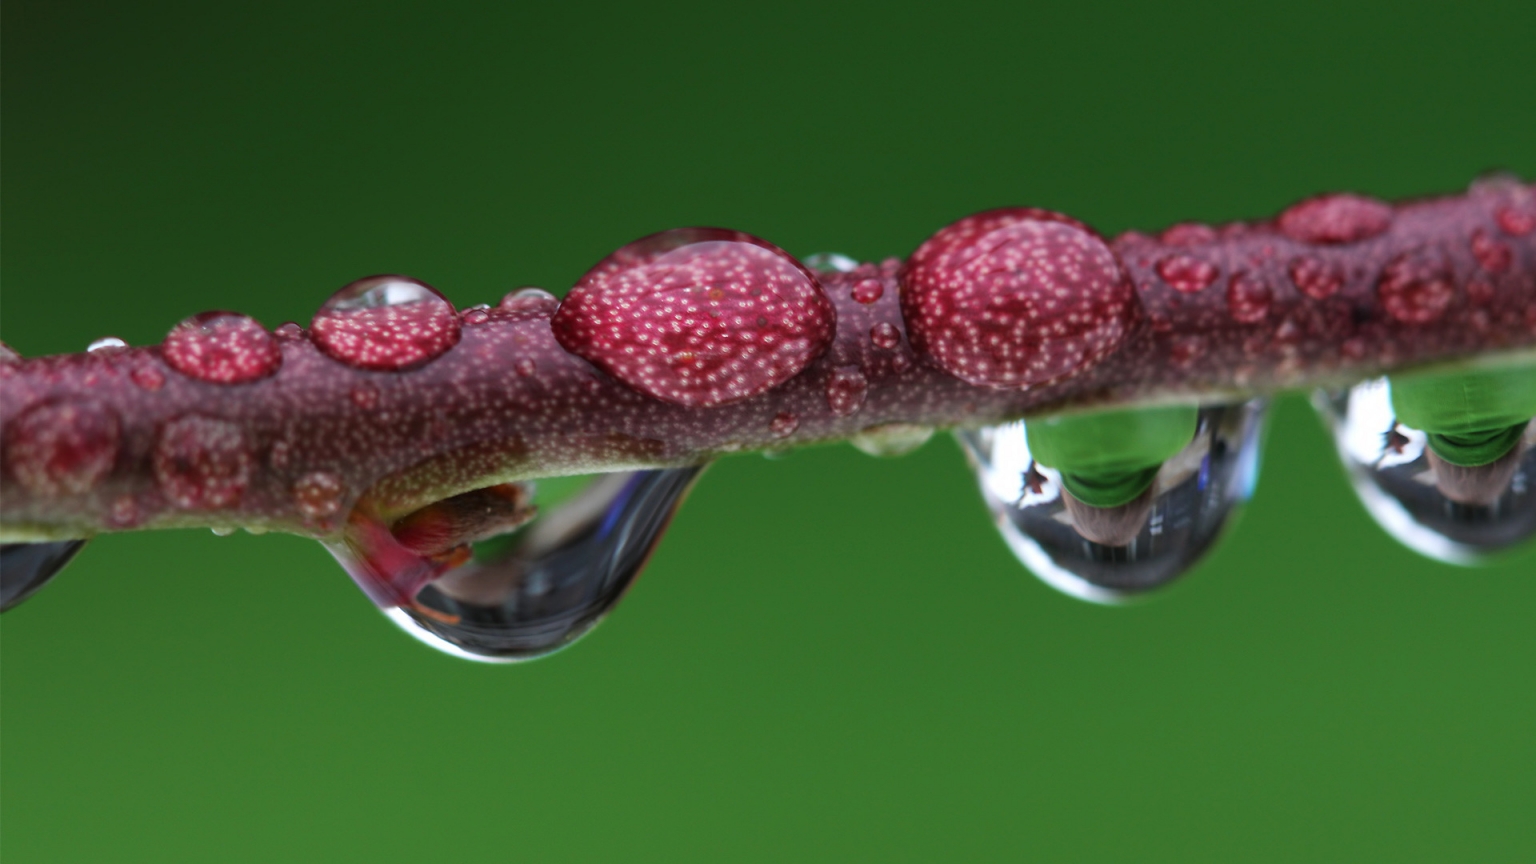 Droplet magnified branch for 1536 x 864 HDTV resolution